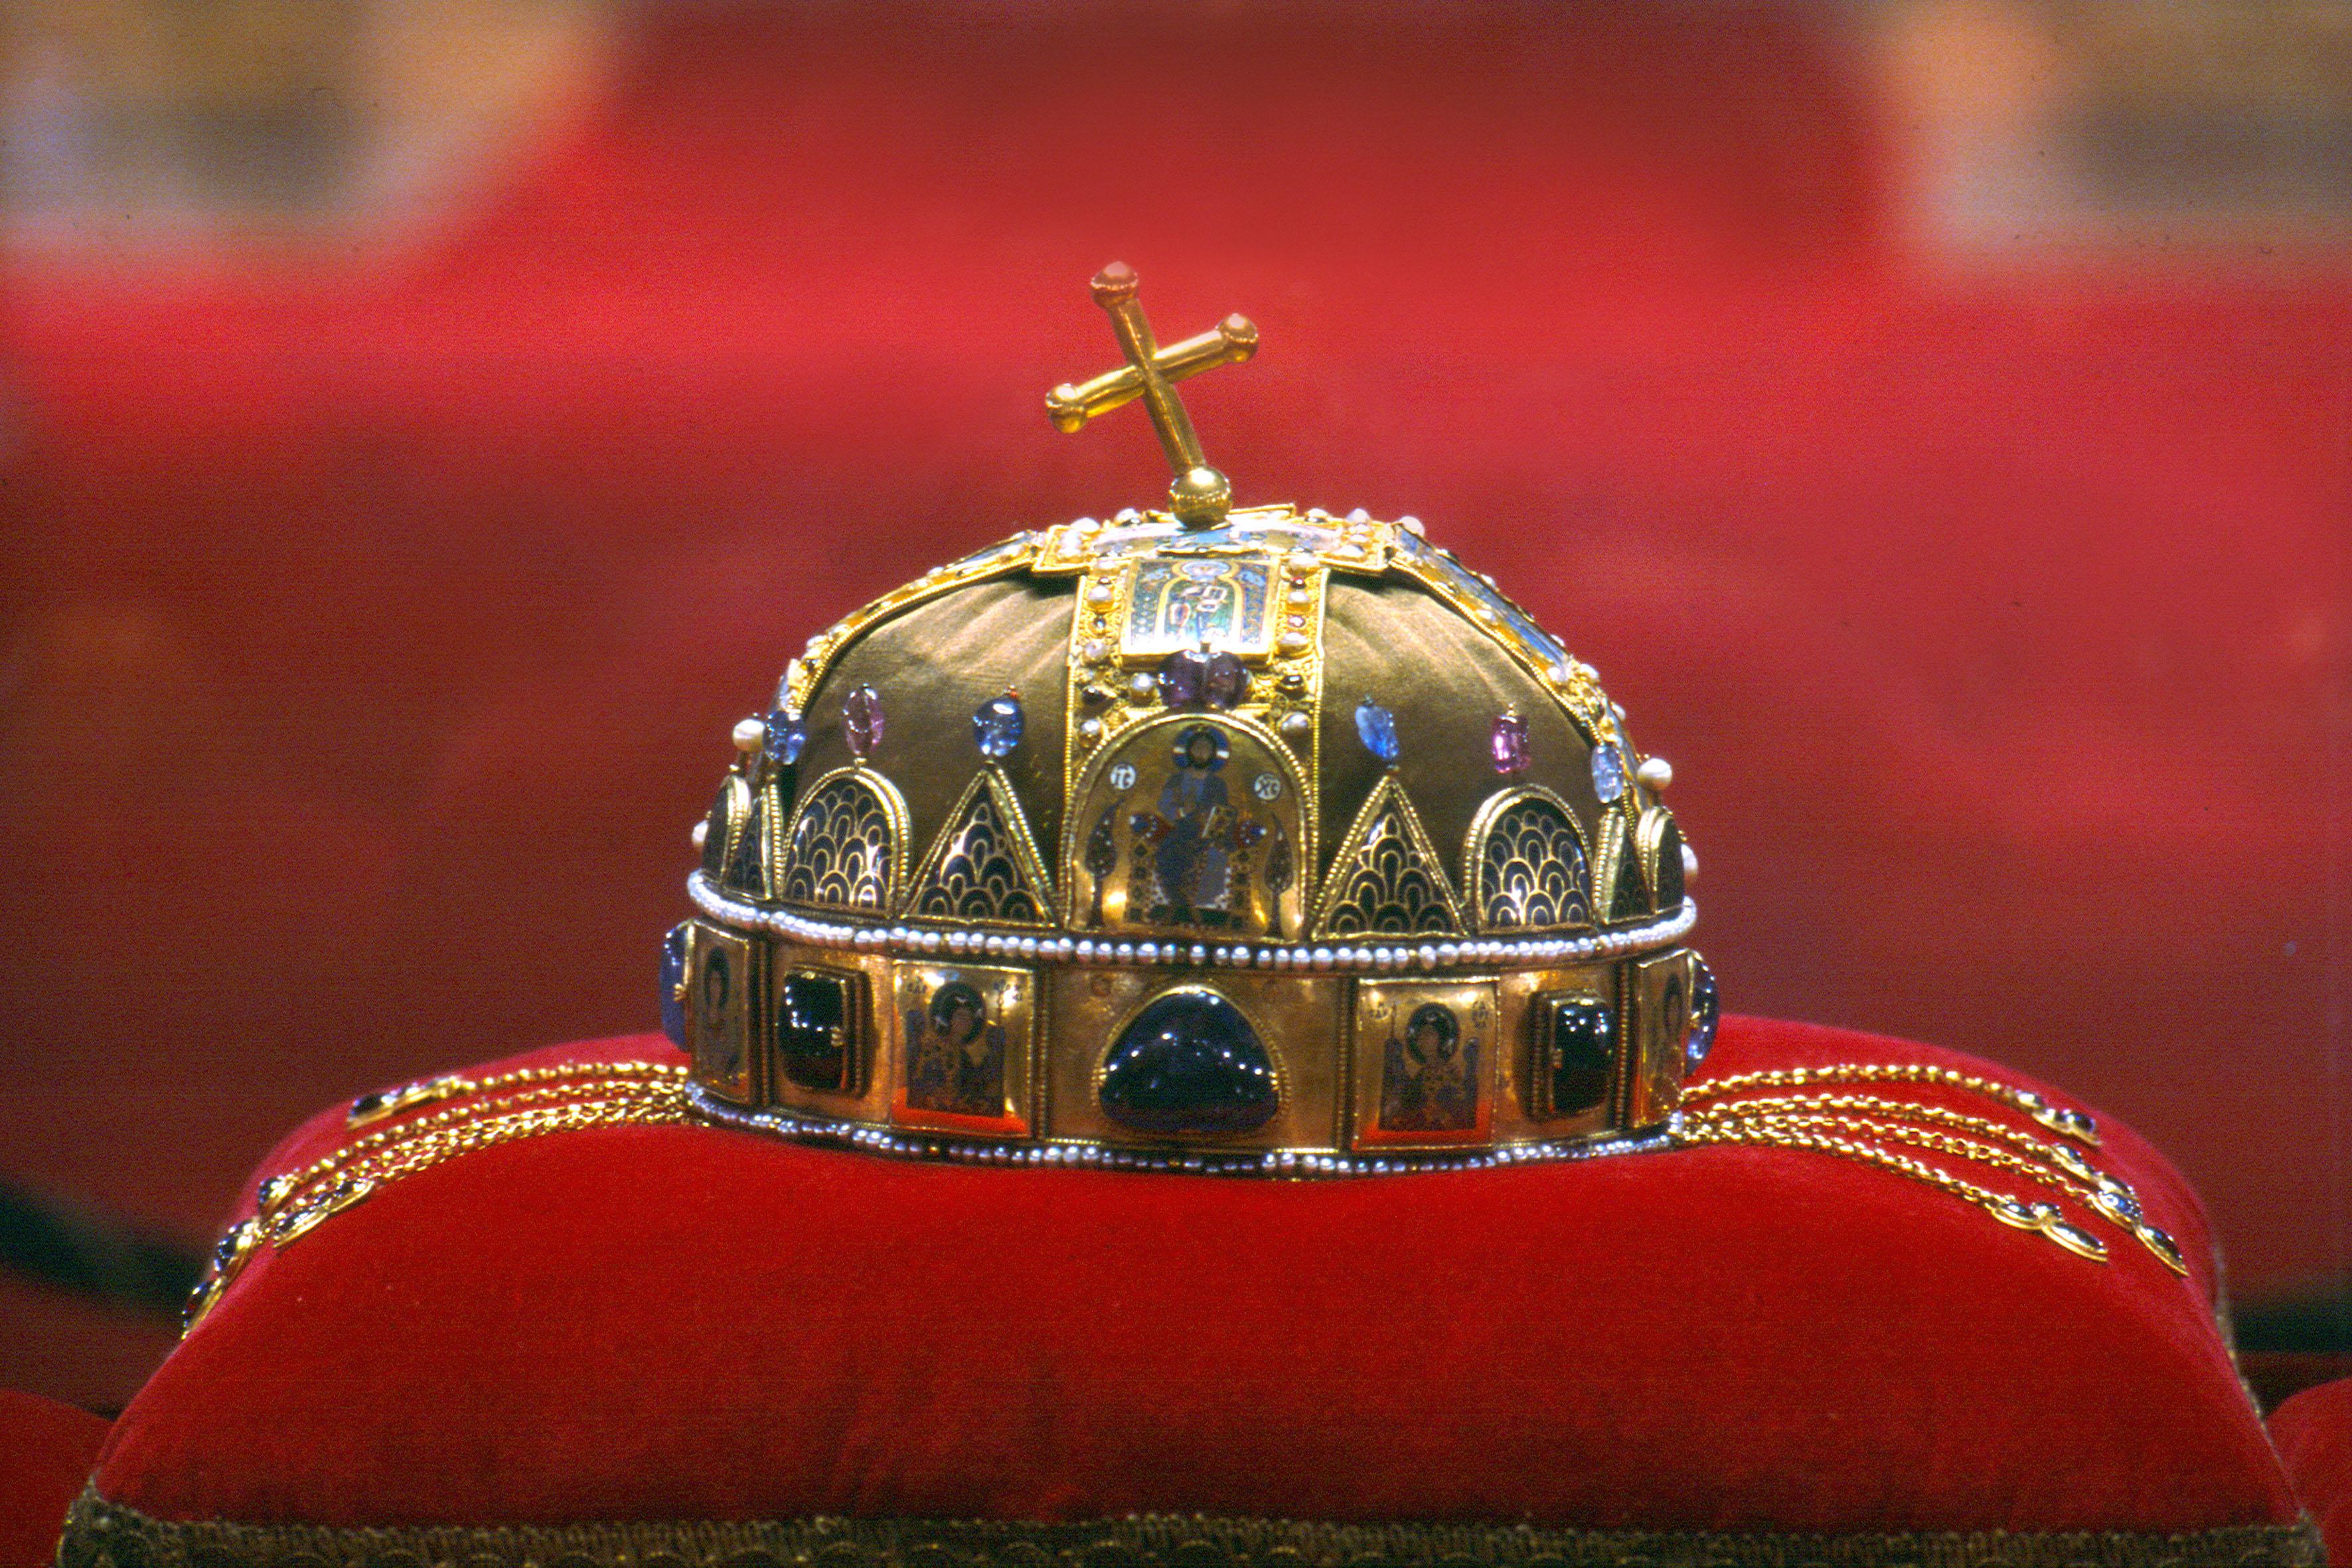 Ministry Comments On Hungary’s Holy Crown Mocking